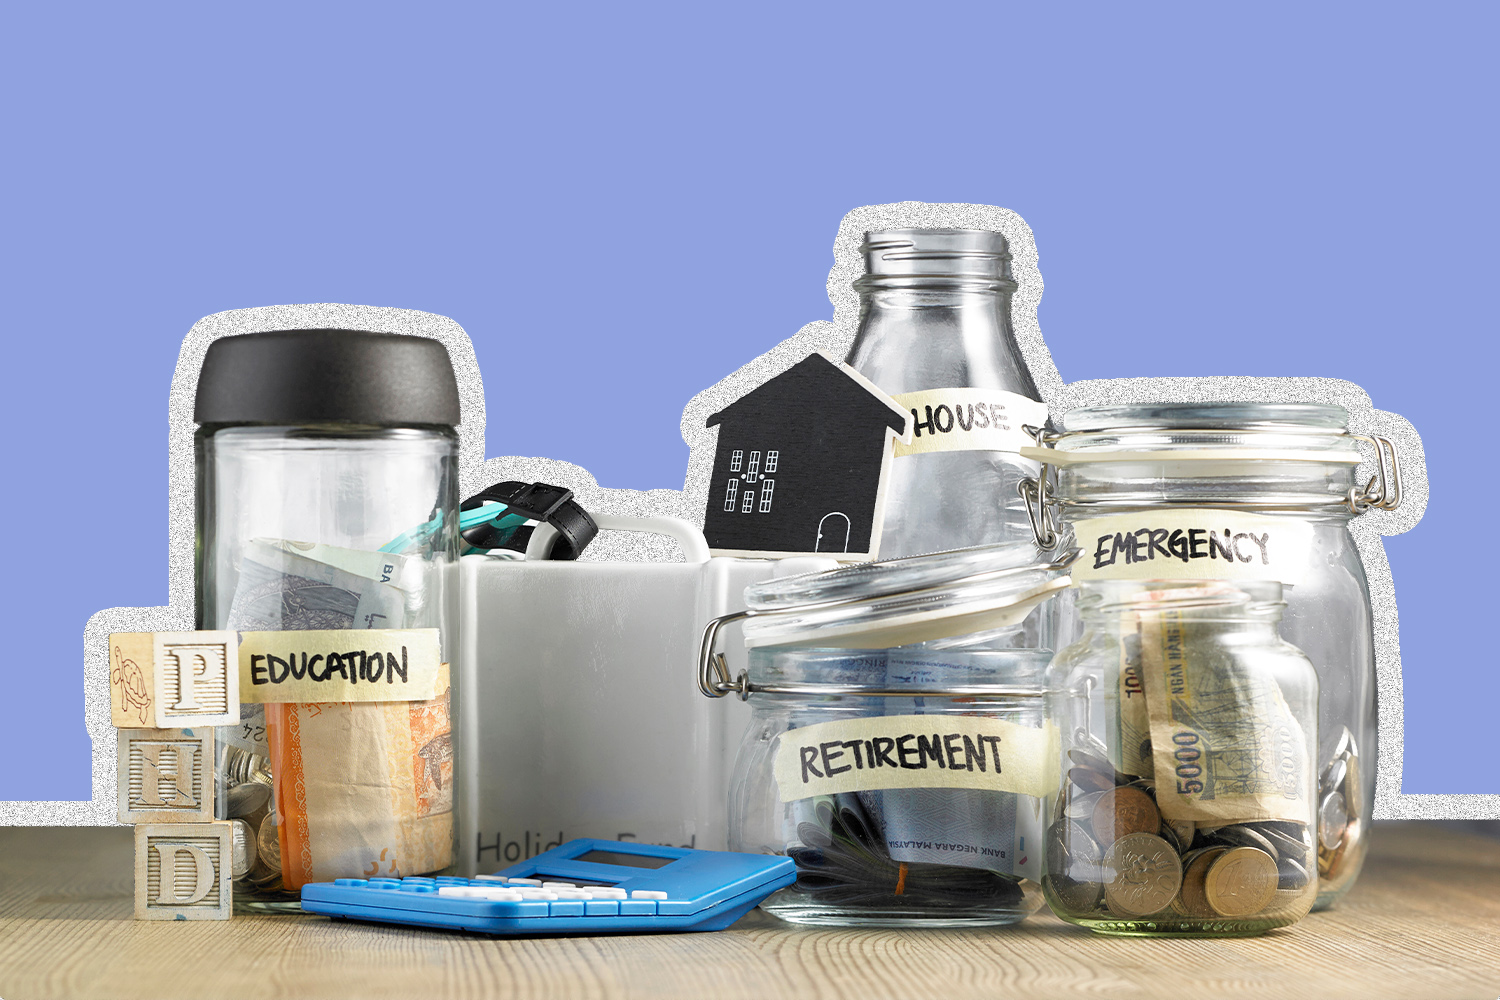 Image of savings funds in glass jars